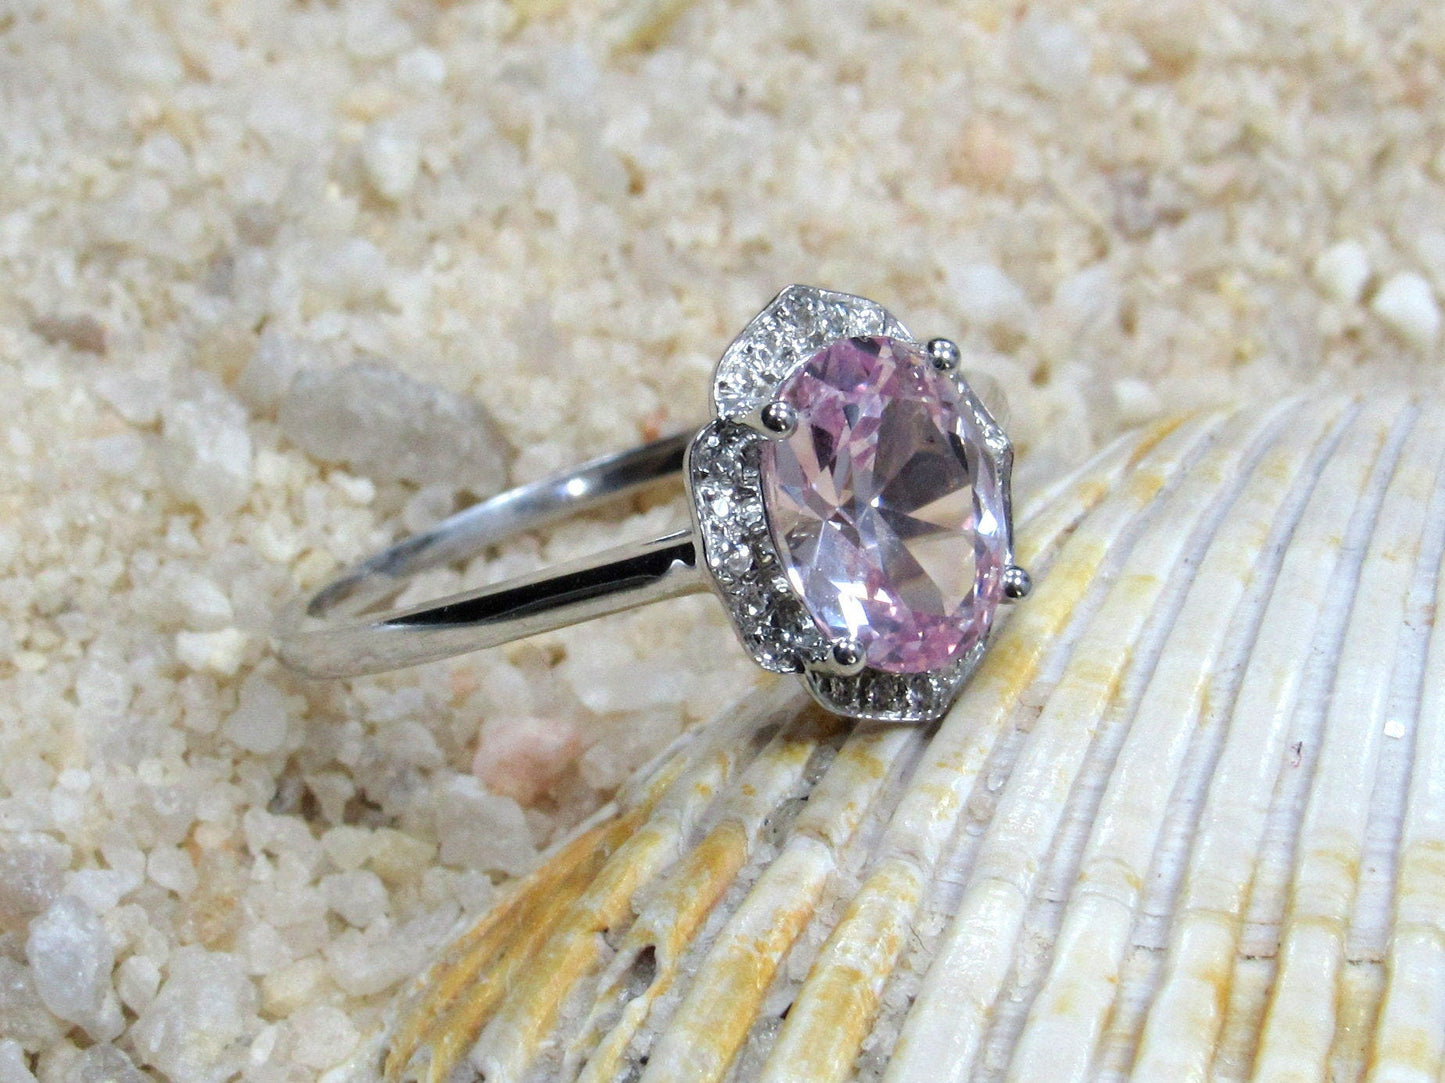 Peach Sapphire Oval Engagement Ring, Floral Ring, Sospita, 2ct Ring, White-Yellow-Rose Gold-10k-14k-18k-Platinum, 8x6mm Oval BellaMoreDesign.com